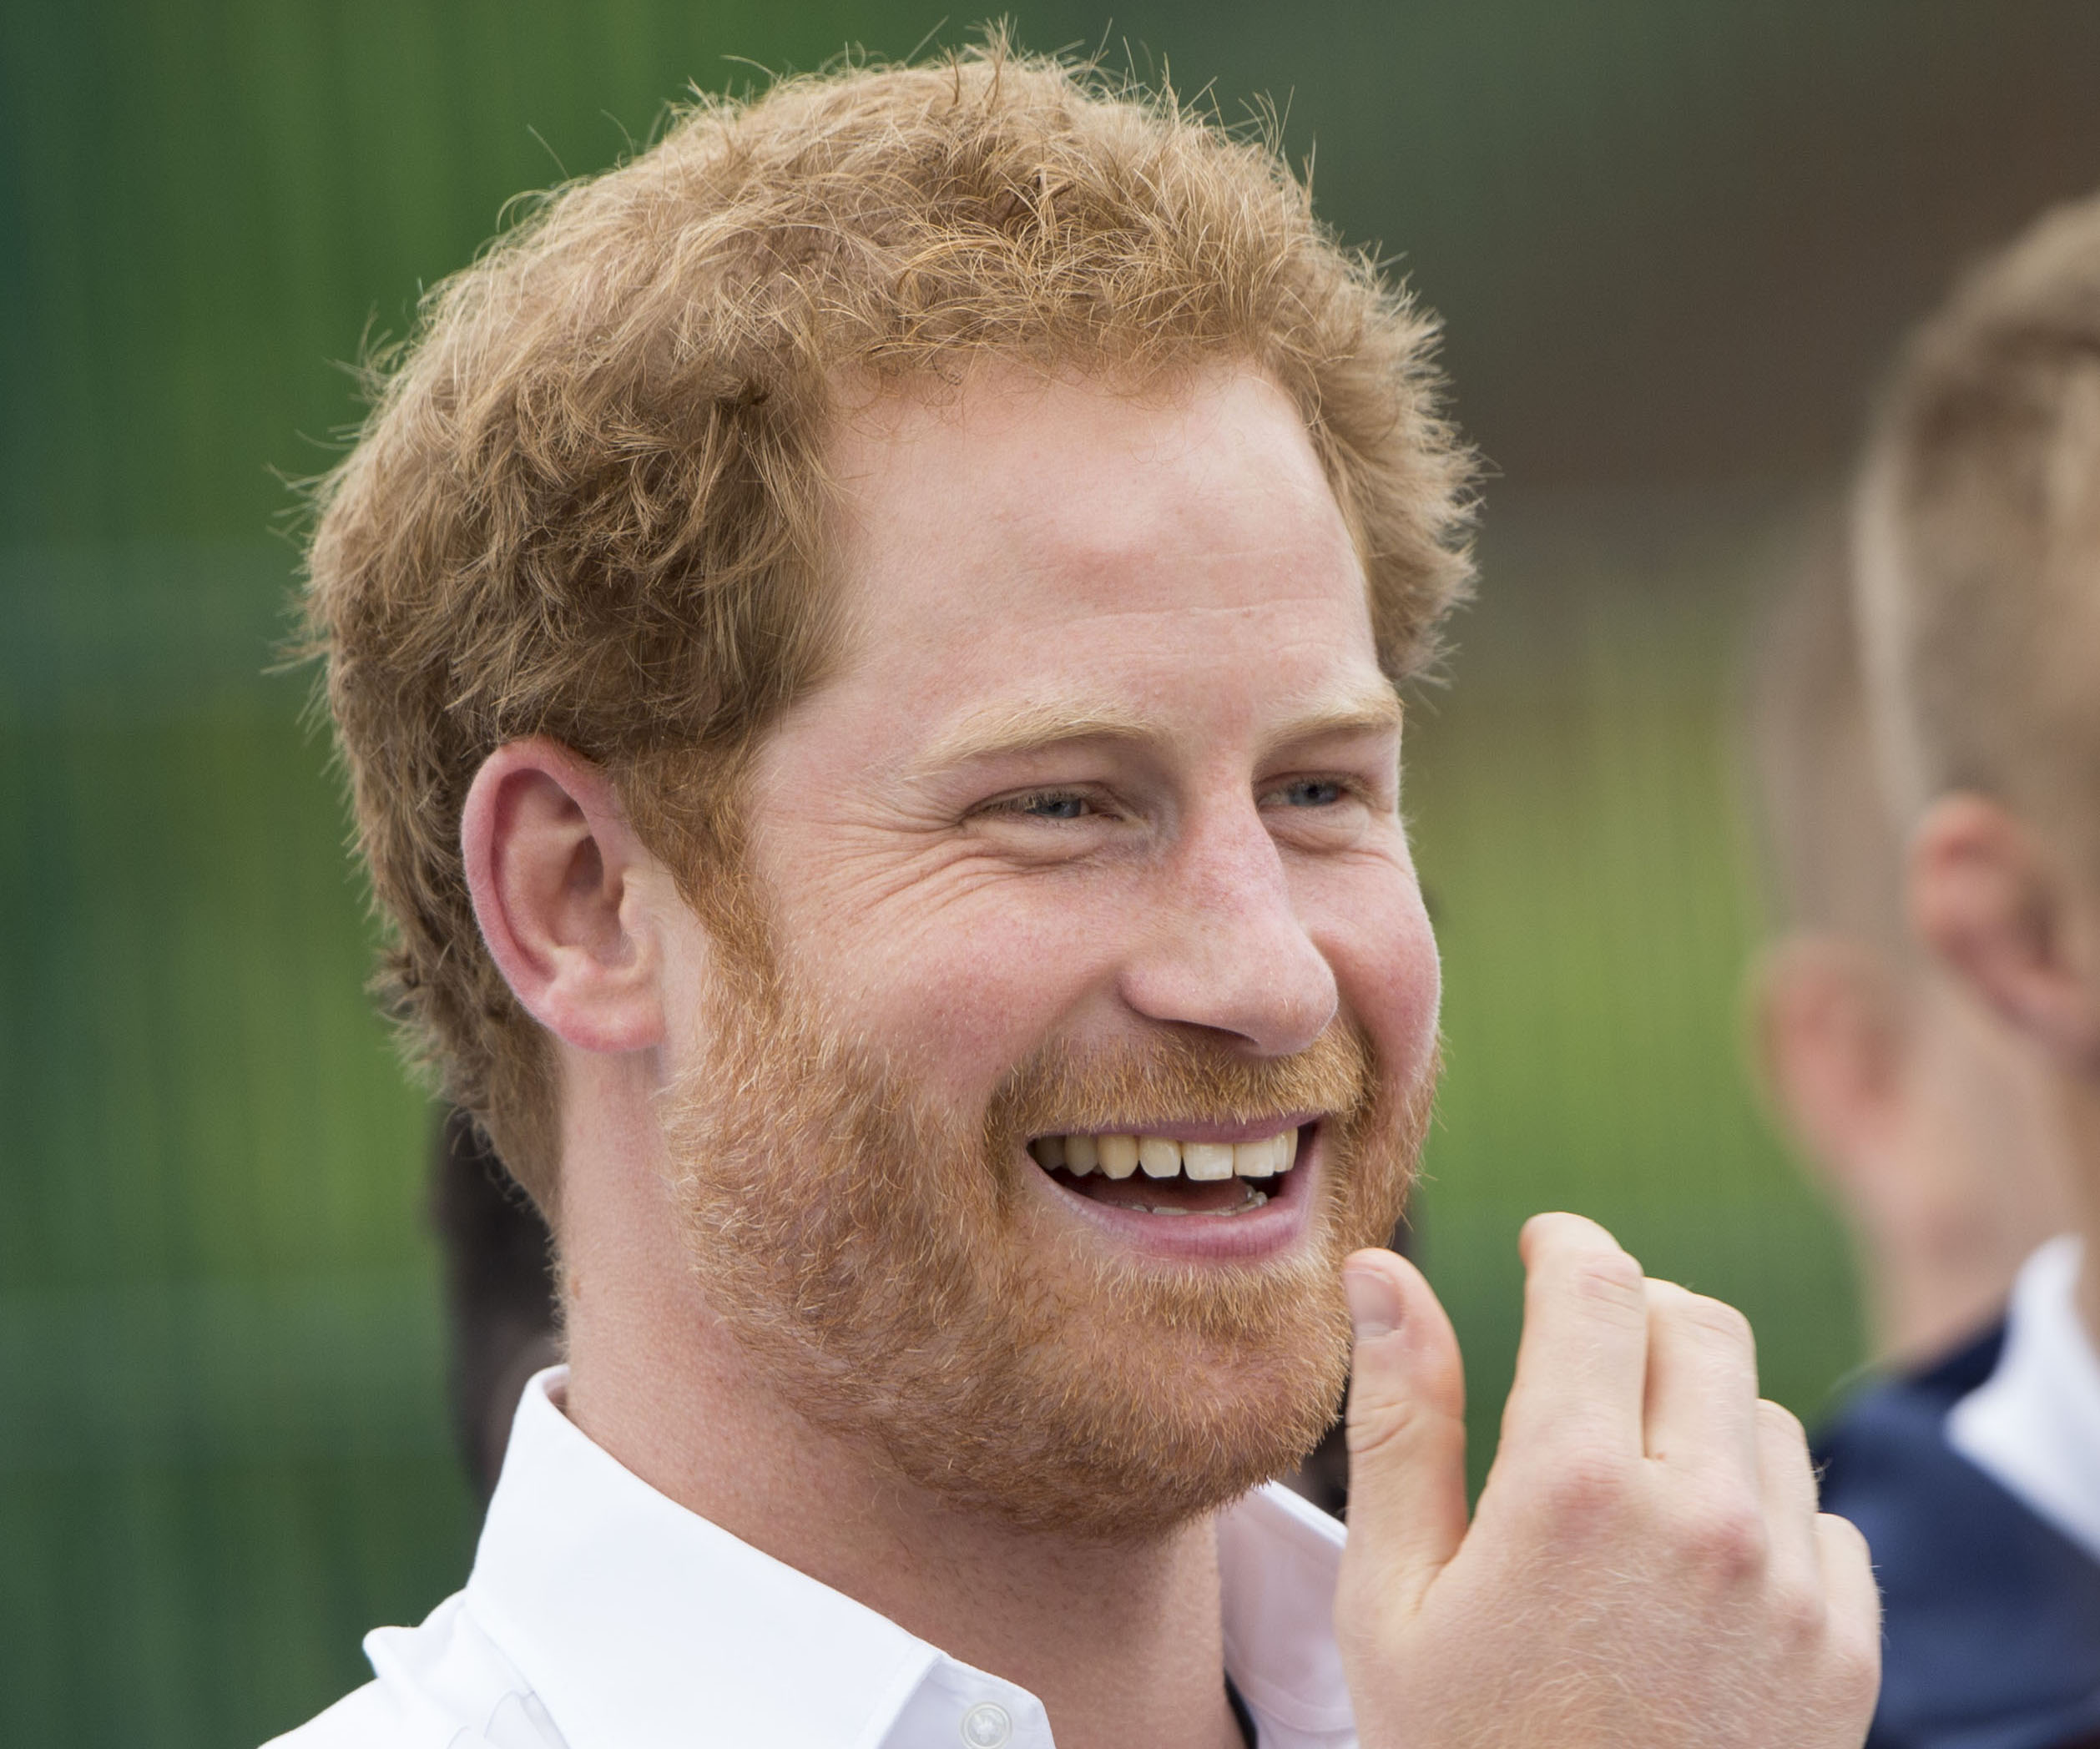 Prince Harry received the cutest marriage proposal from a six-year-old girl